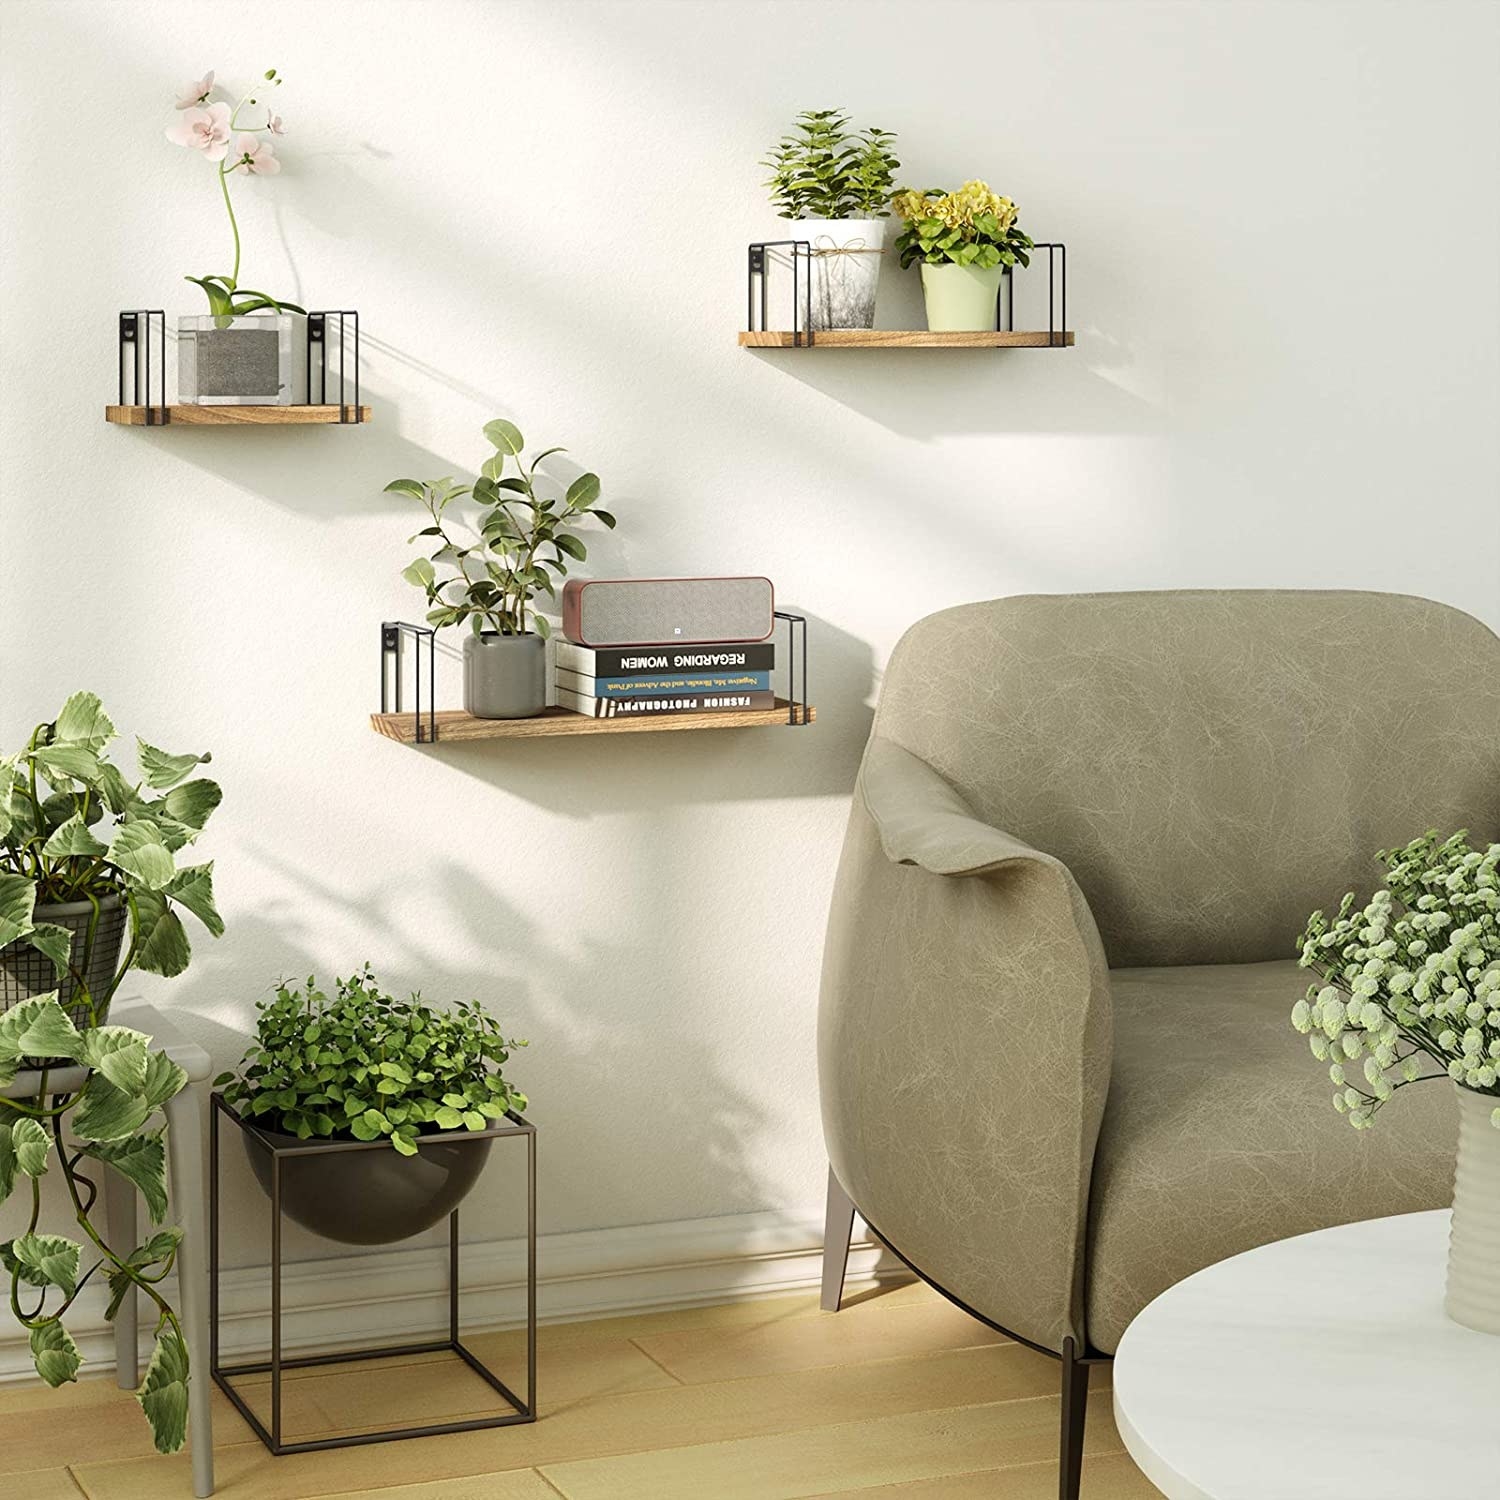 the shelves on a wall with plants and books on it